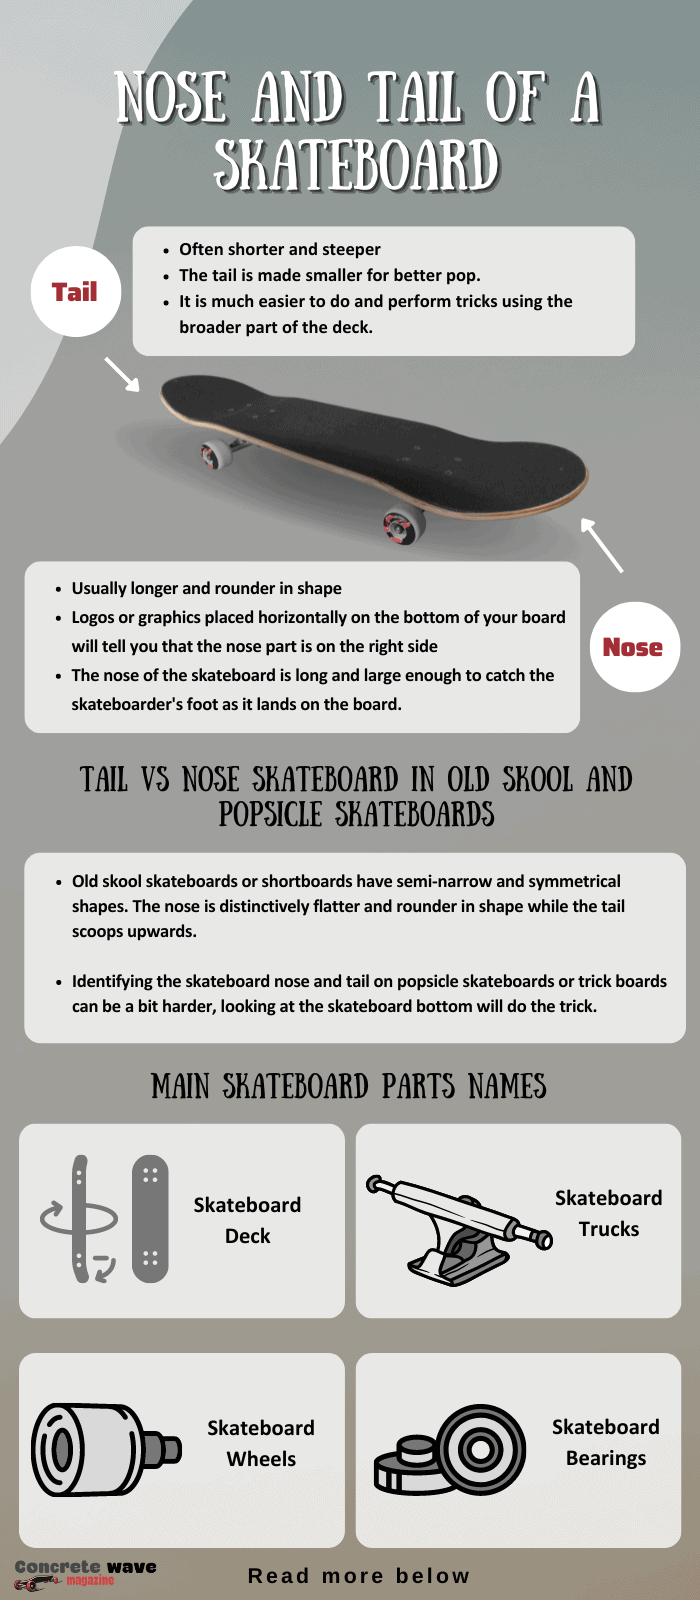 Nose Tail of a Skateboard: What Makes Them Different?